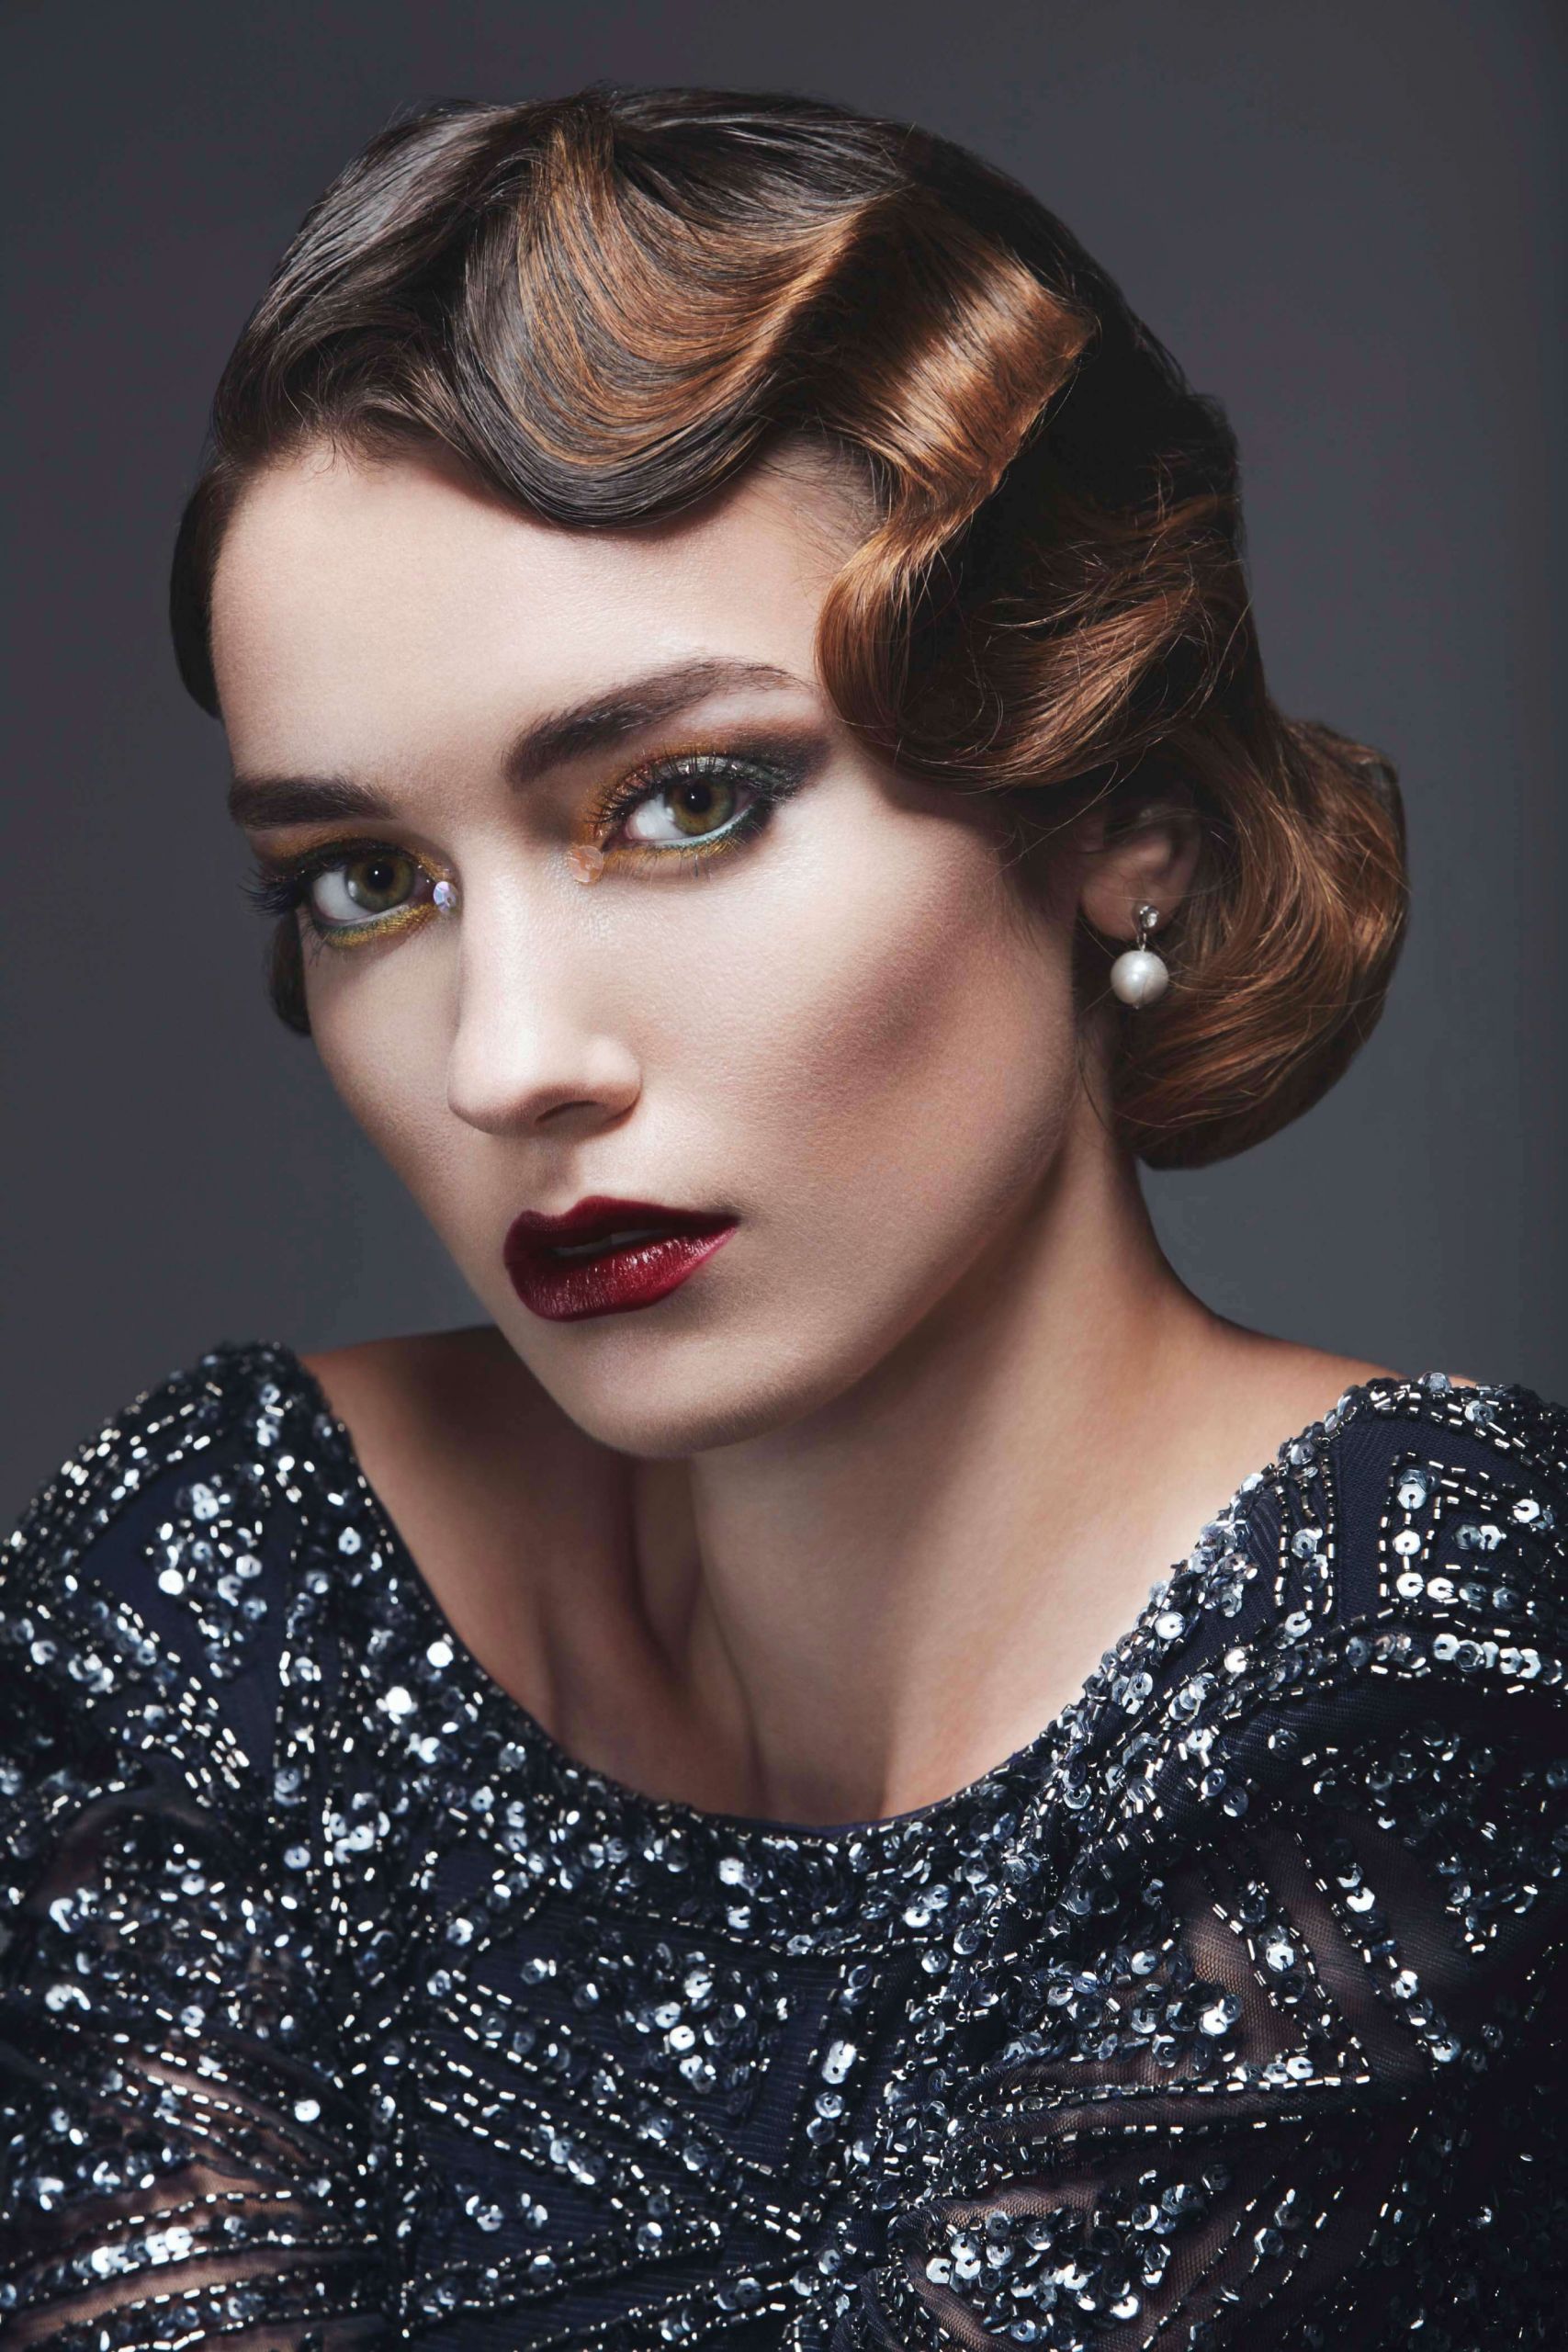 1920s Updo Hairstyles Awesome Vintage Hairstyles For Beginners Know Your Eras With Our Of 1920s Updo Hairstyles Scaled 